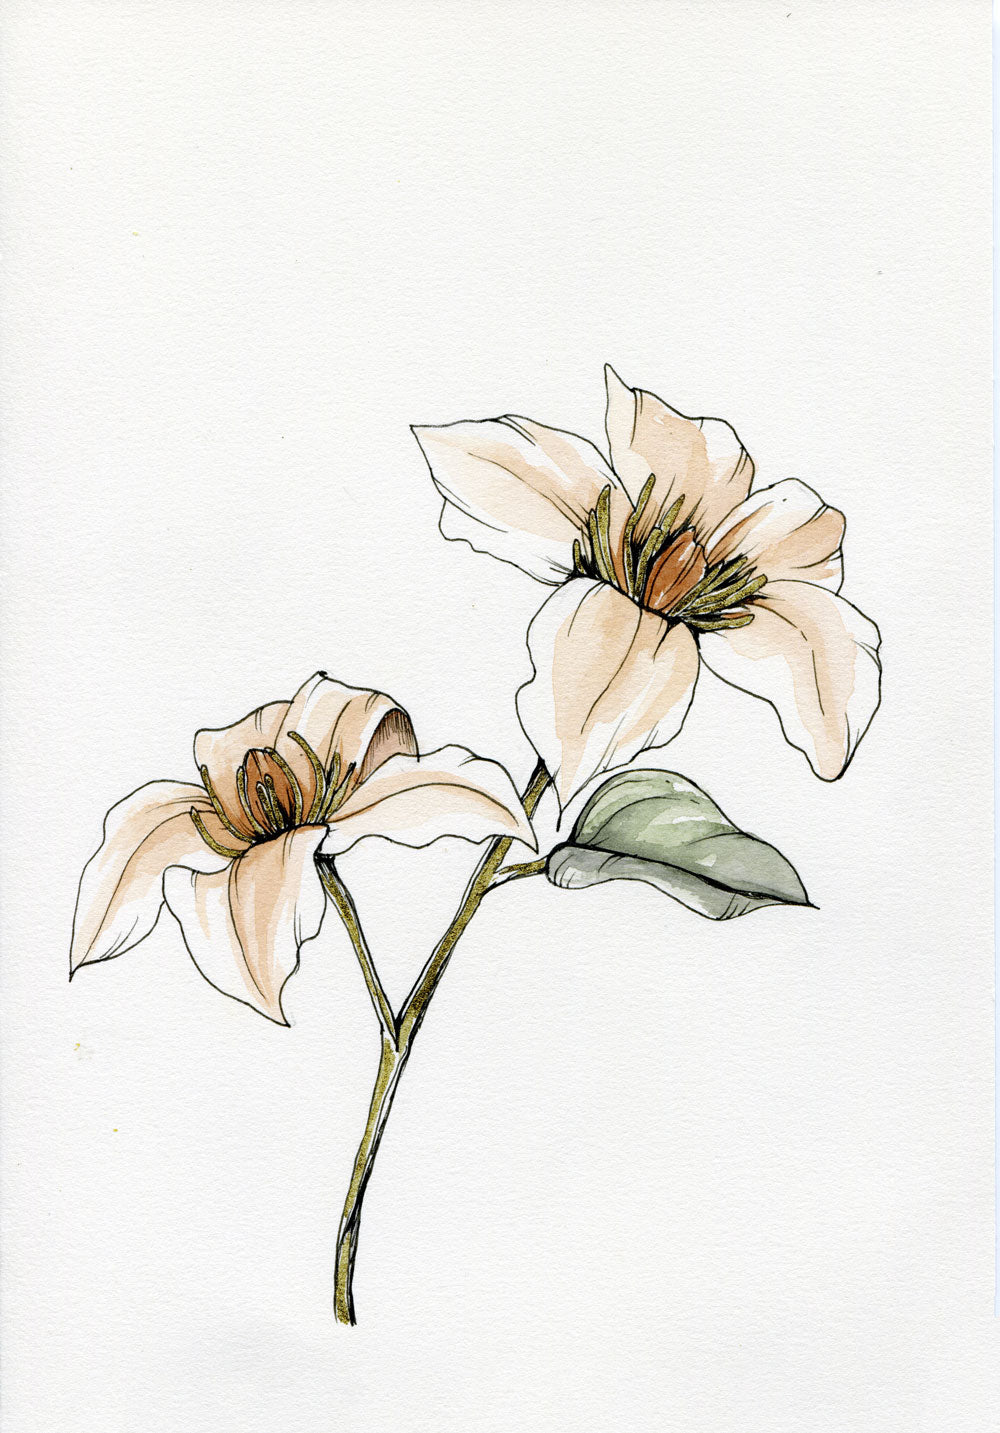 Day 12 - Clematis